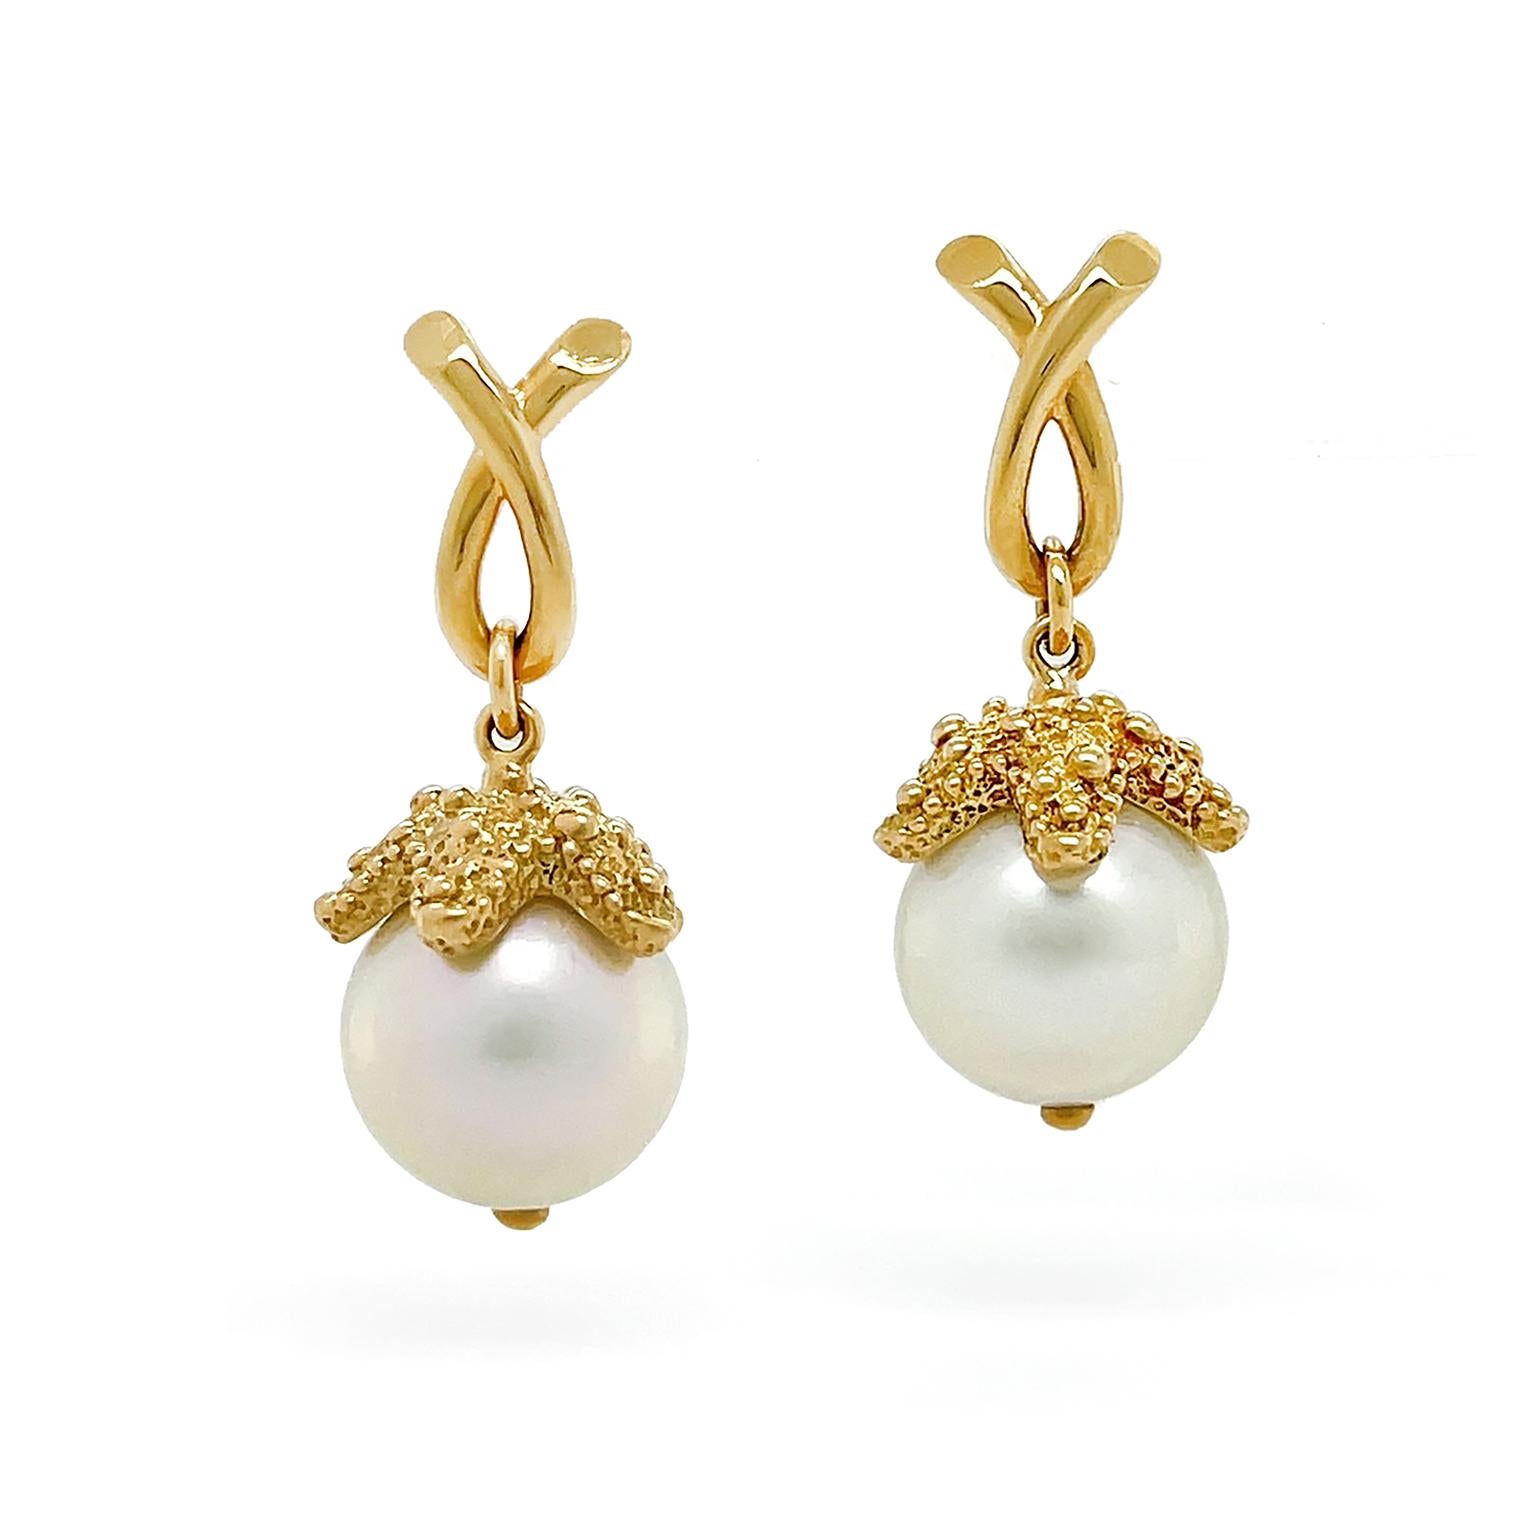 A vibrant starfish embraces a pearl for these drop earrings. An 18k yellow gold loop descends a starfish made of the same metal. The craftsmanship of a textured body contrasts with the smooth round south sea pearl sheltered beneath. The total weight